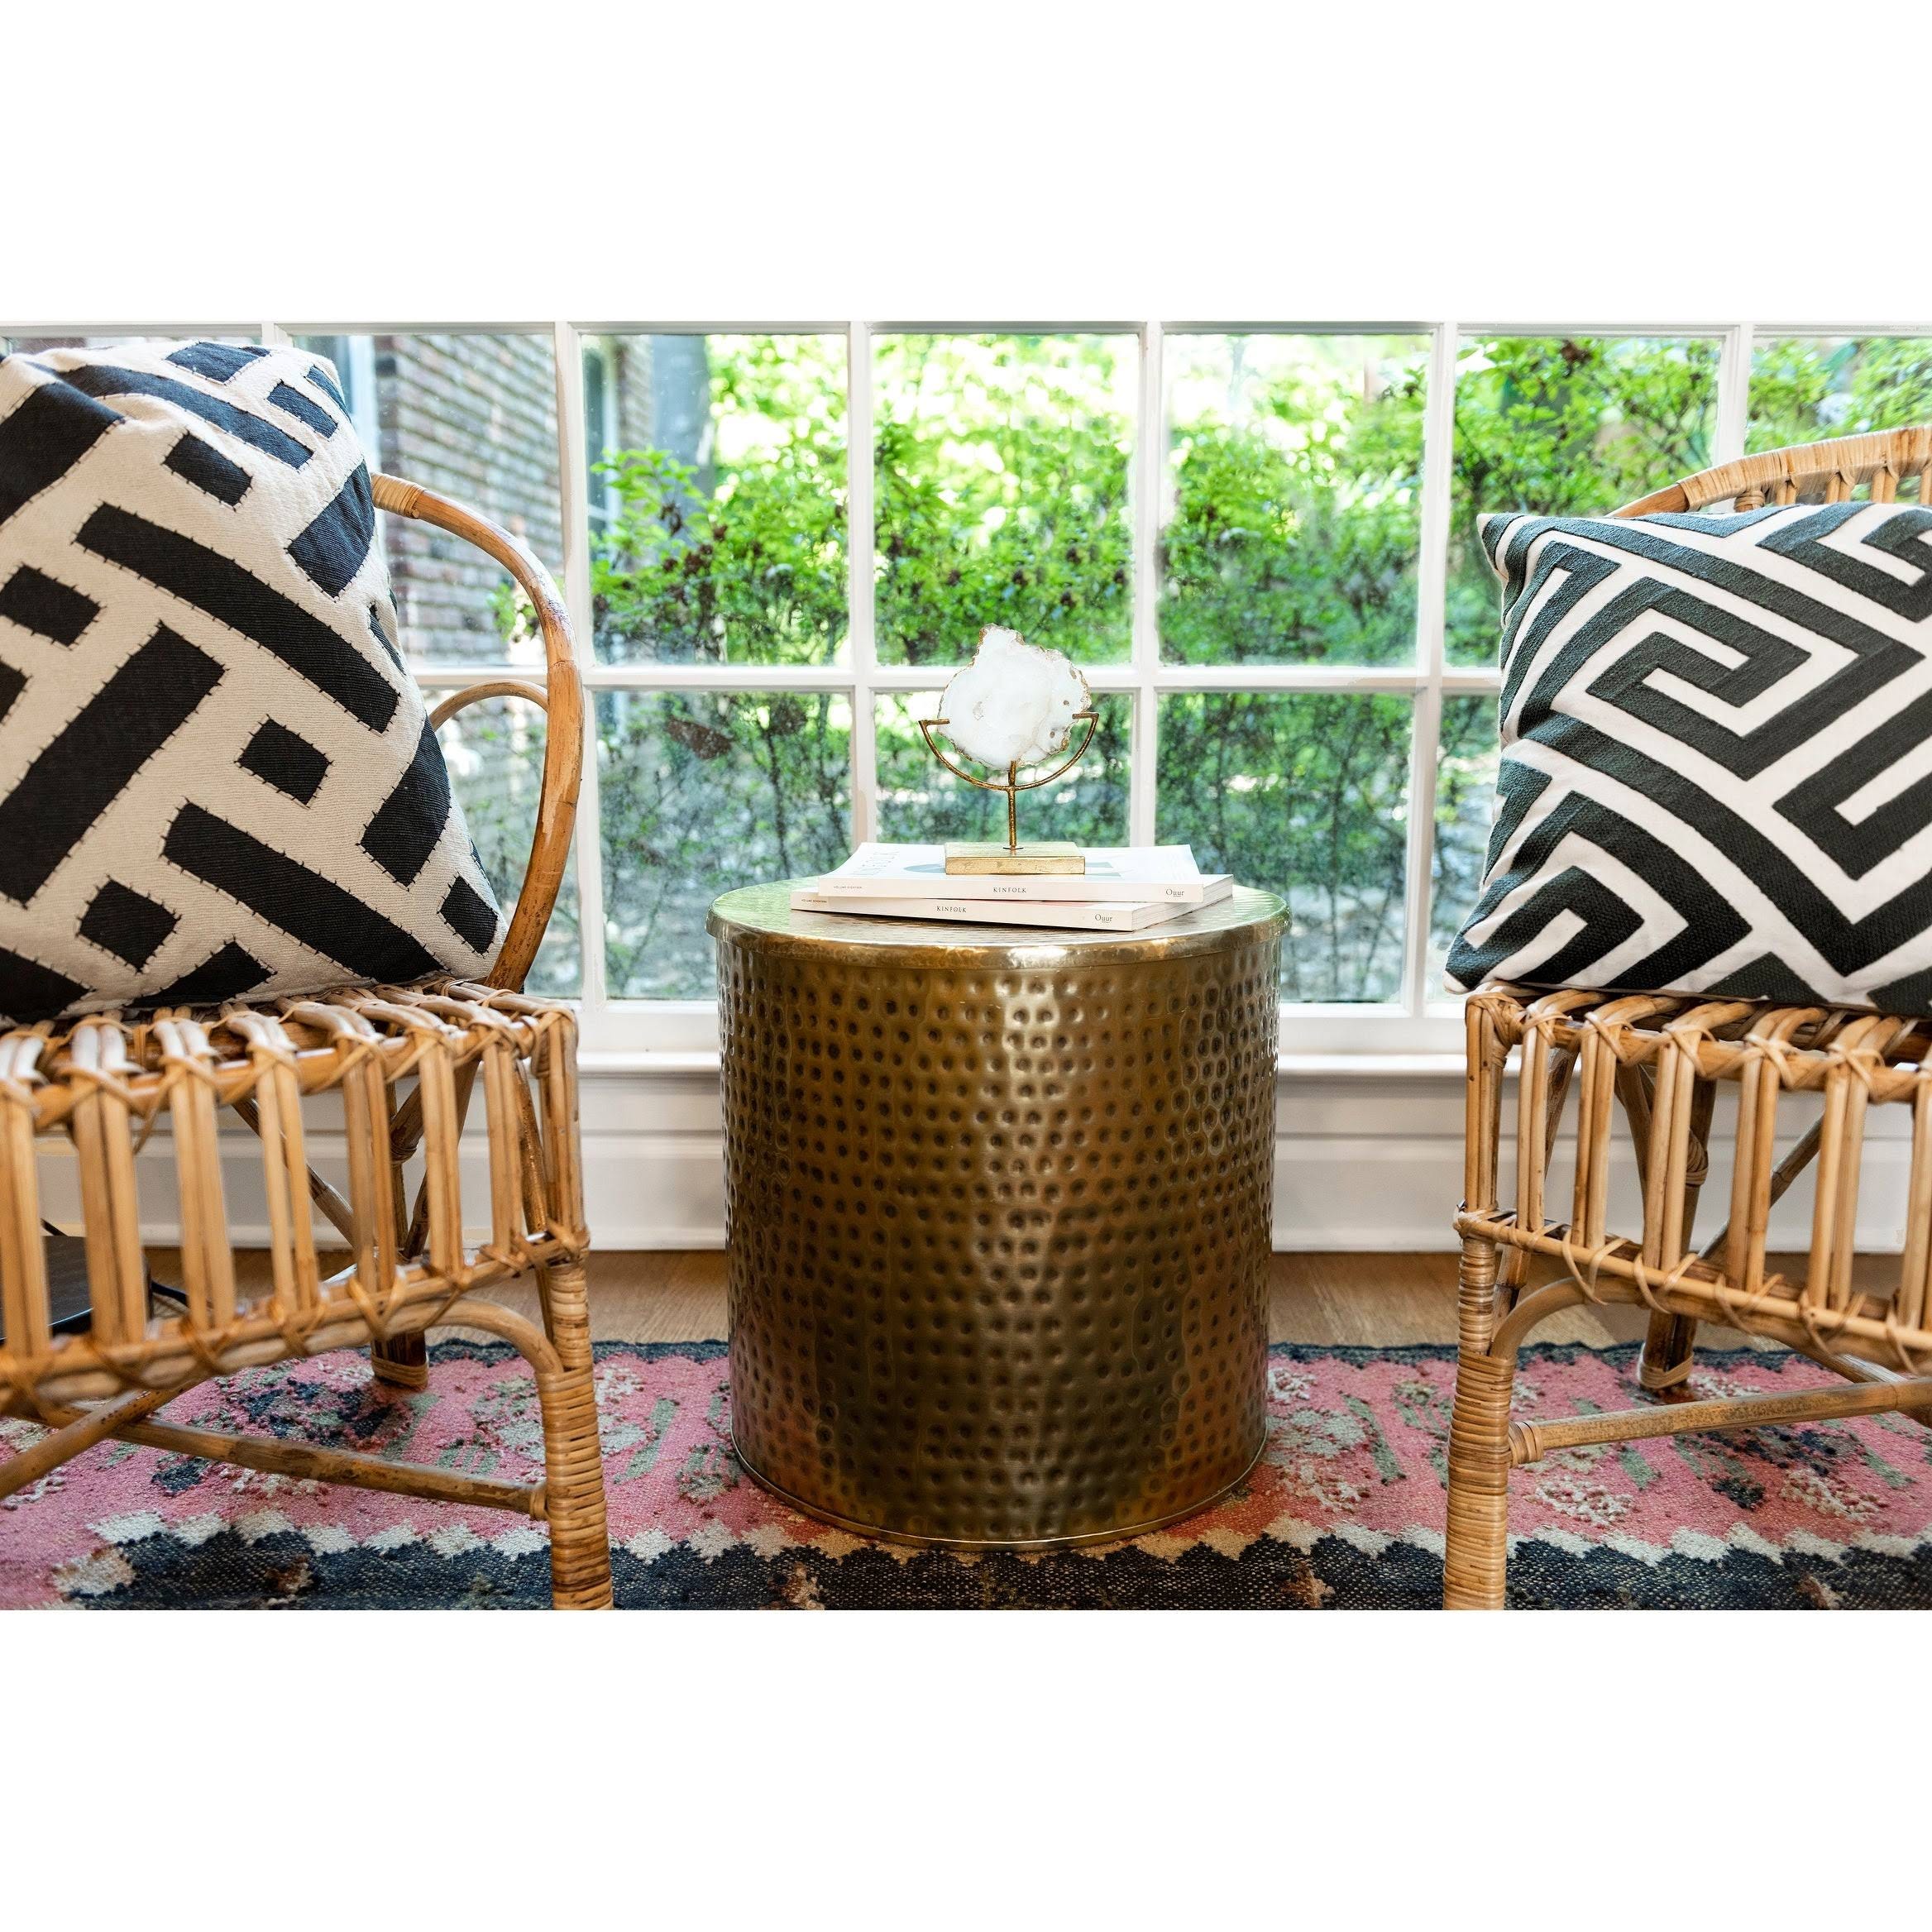 Brass Hammered Metal Drum Table with Storage and Lid for Versatile Use | Image